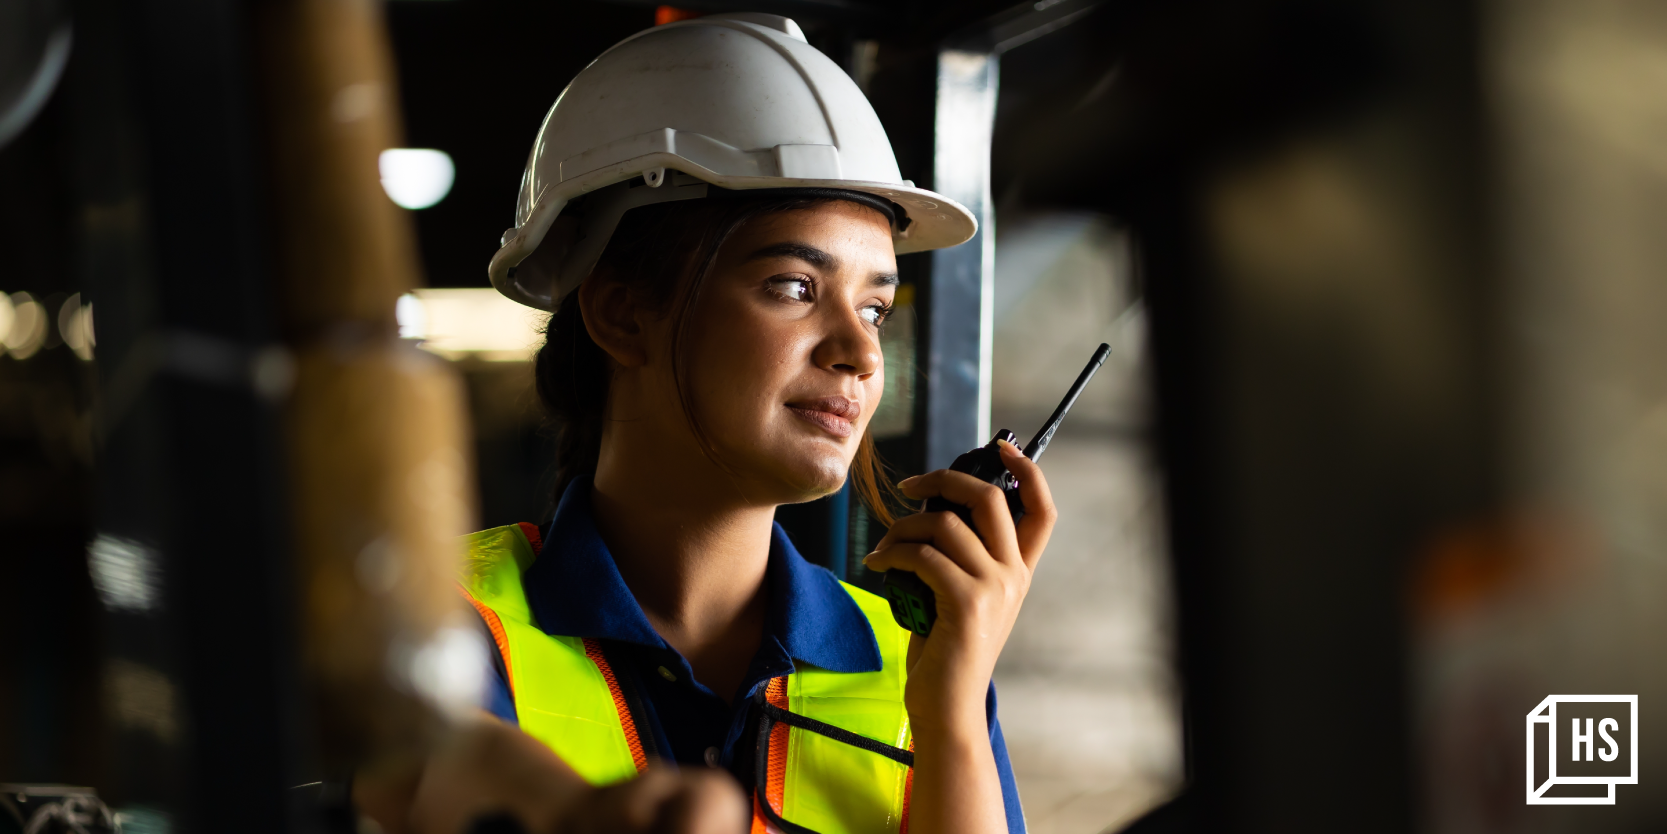 Breaking barriers: women's leadership in the cement and infrastructure industry

